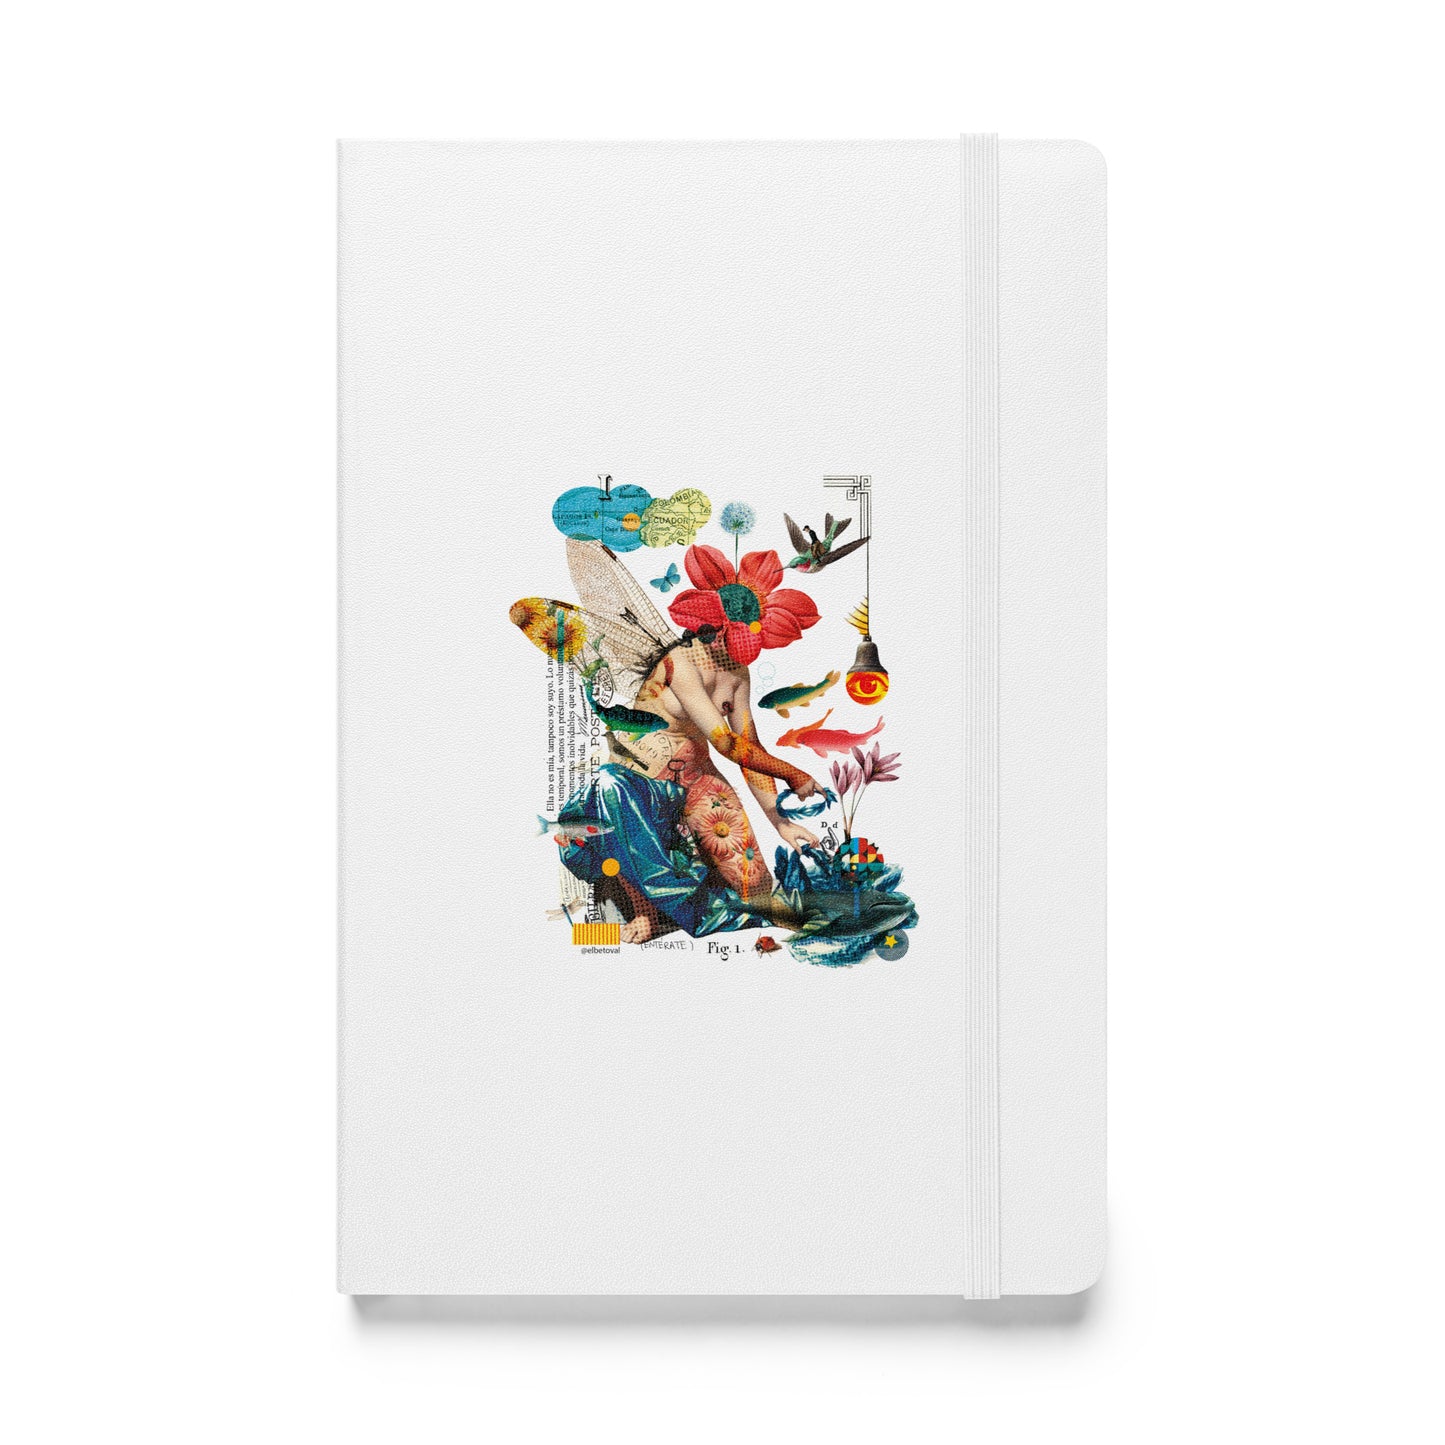 MUSE Hardcover bound notebook